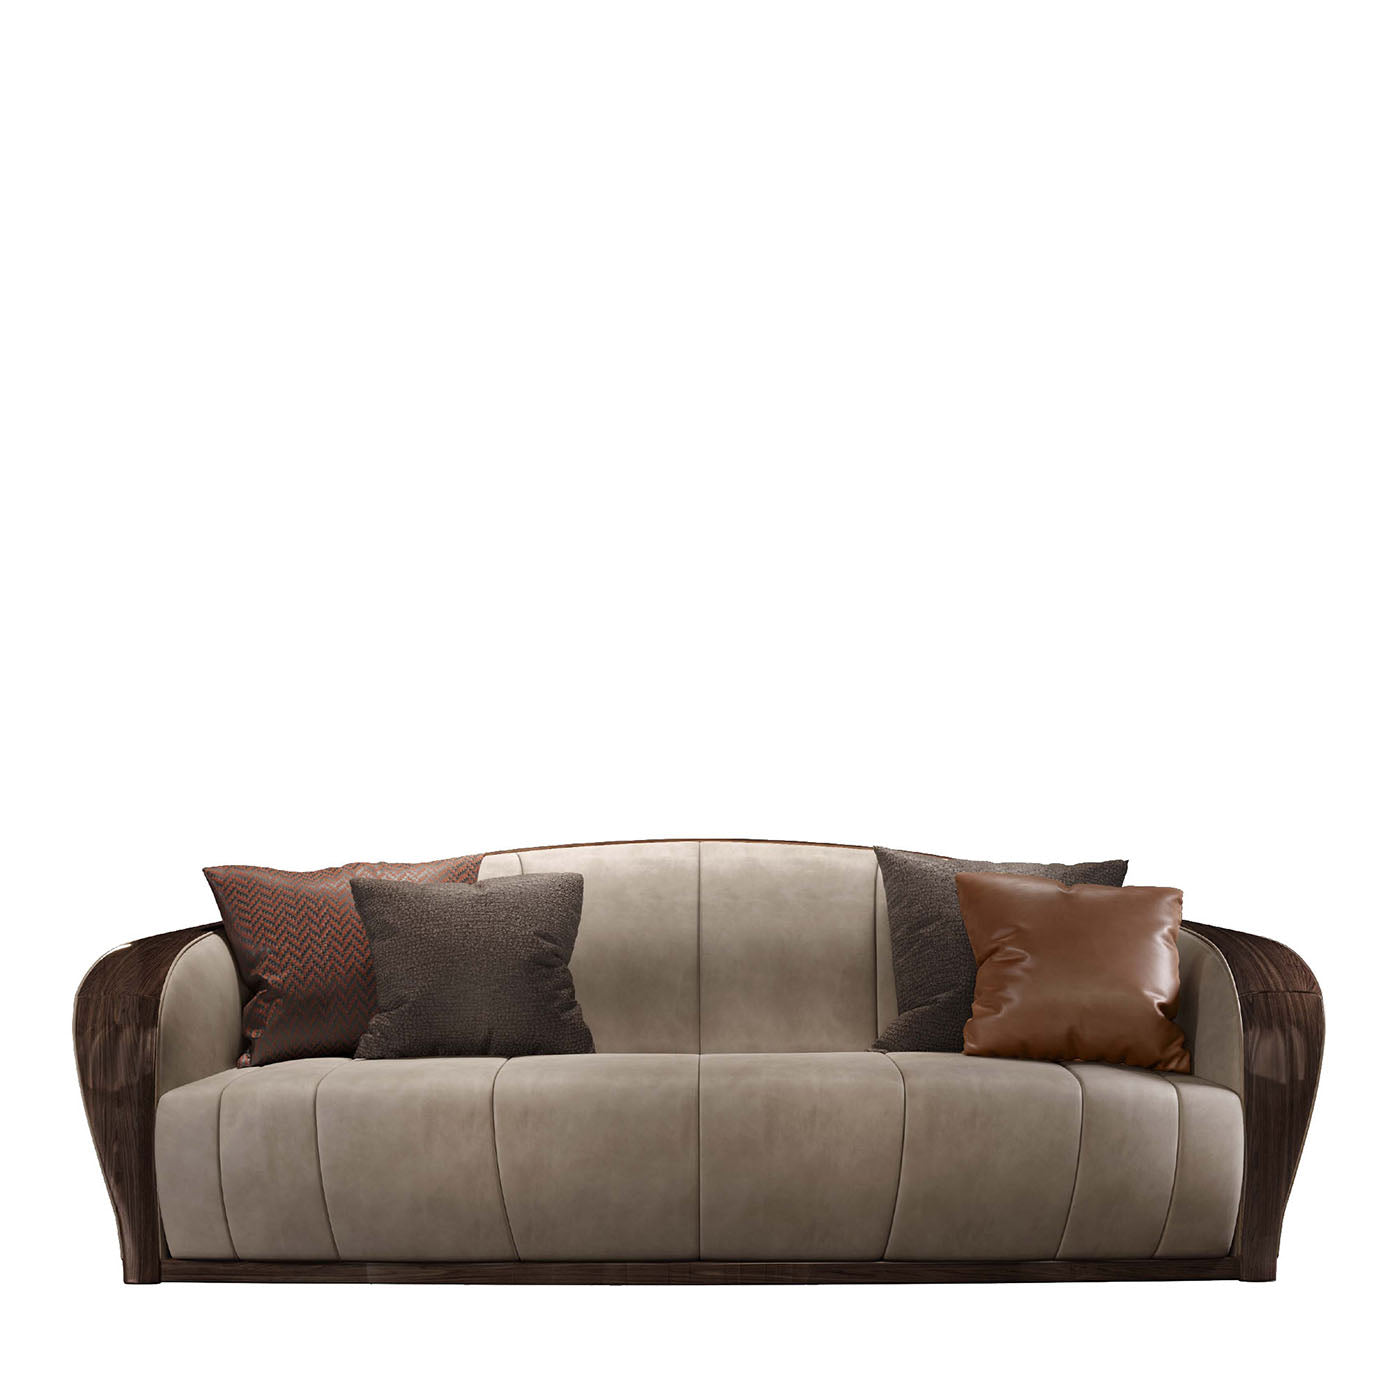  Castagno Channeled Brown-Leather Sofa - Main view